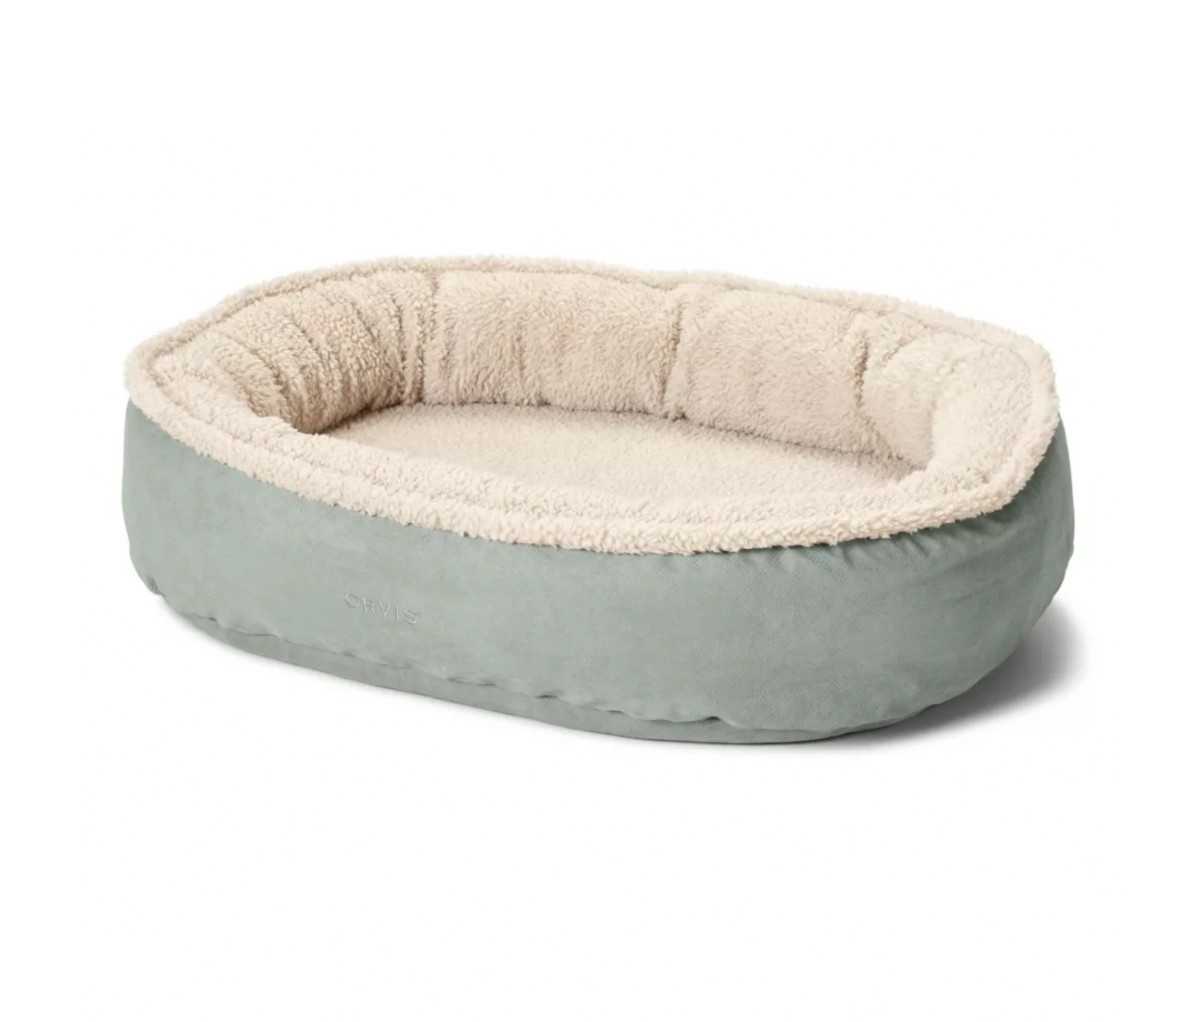 Green and white oval dog bed on a white background.